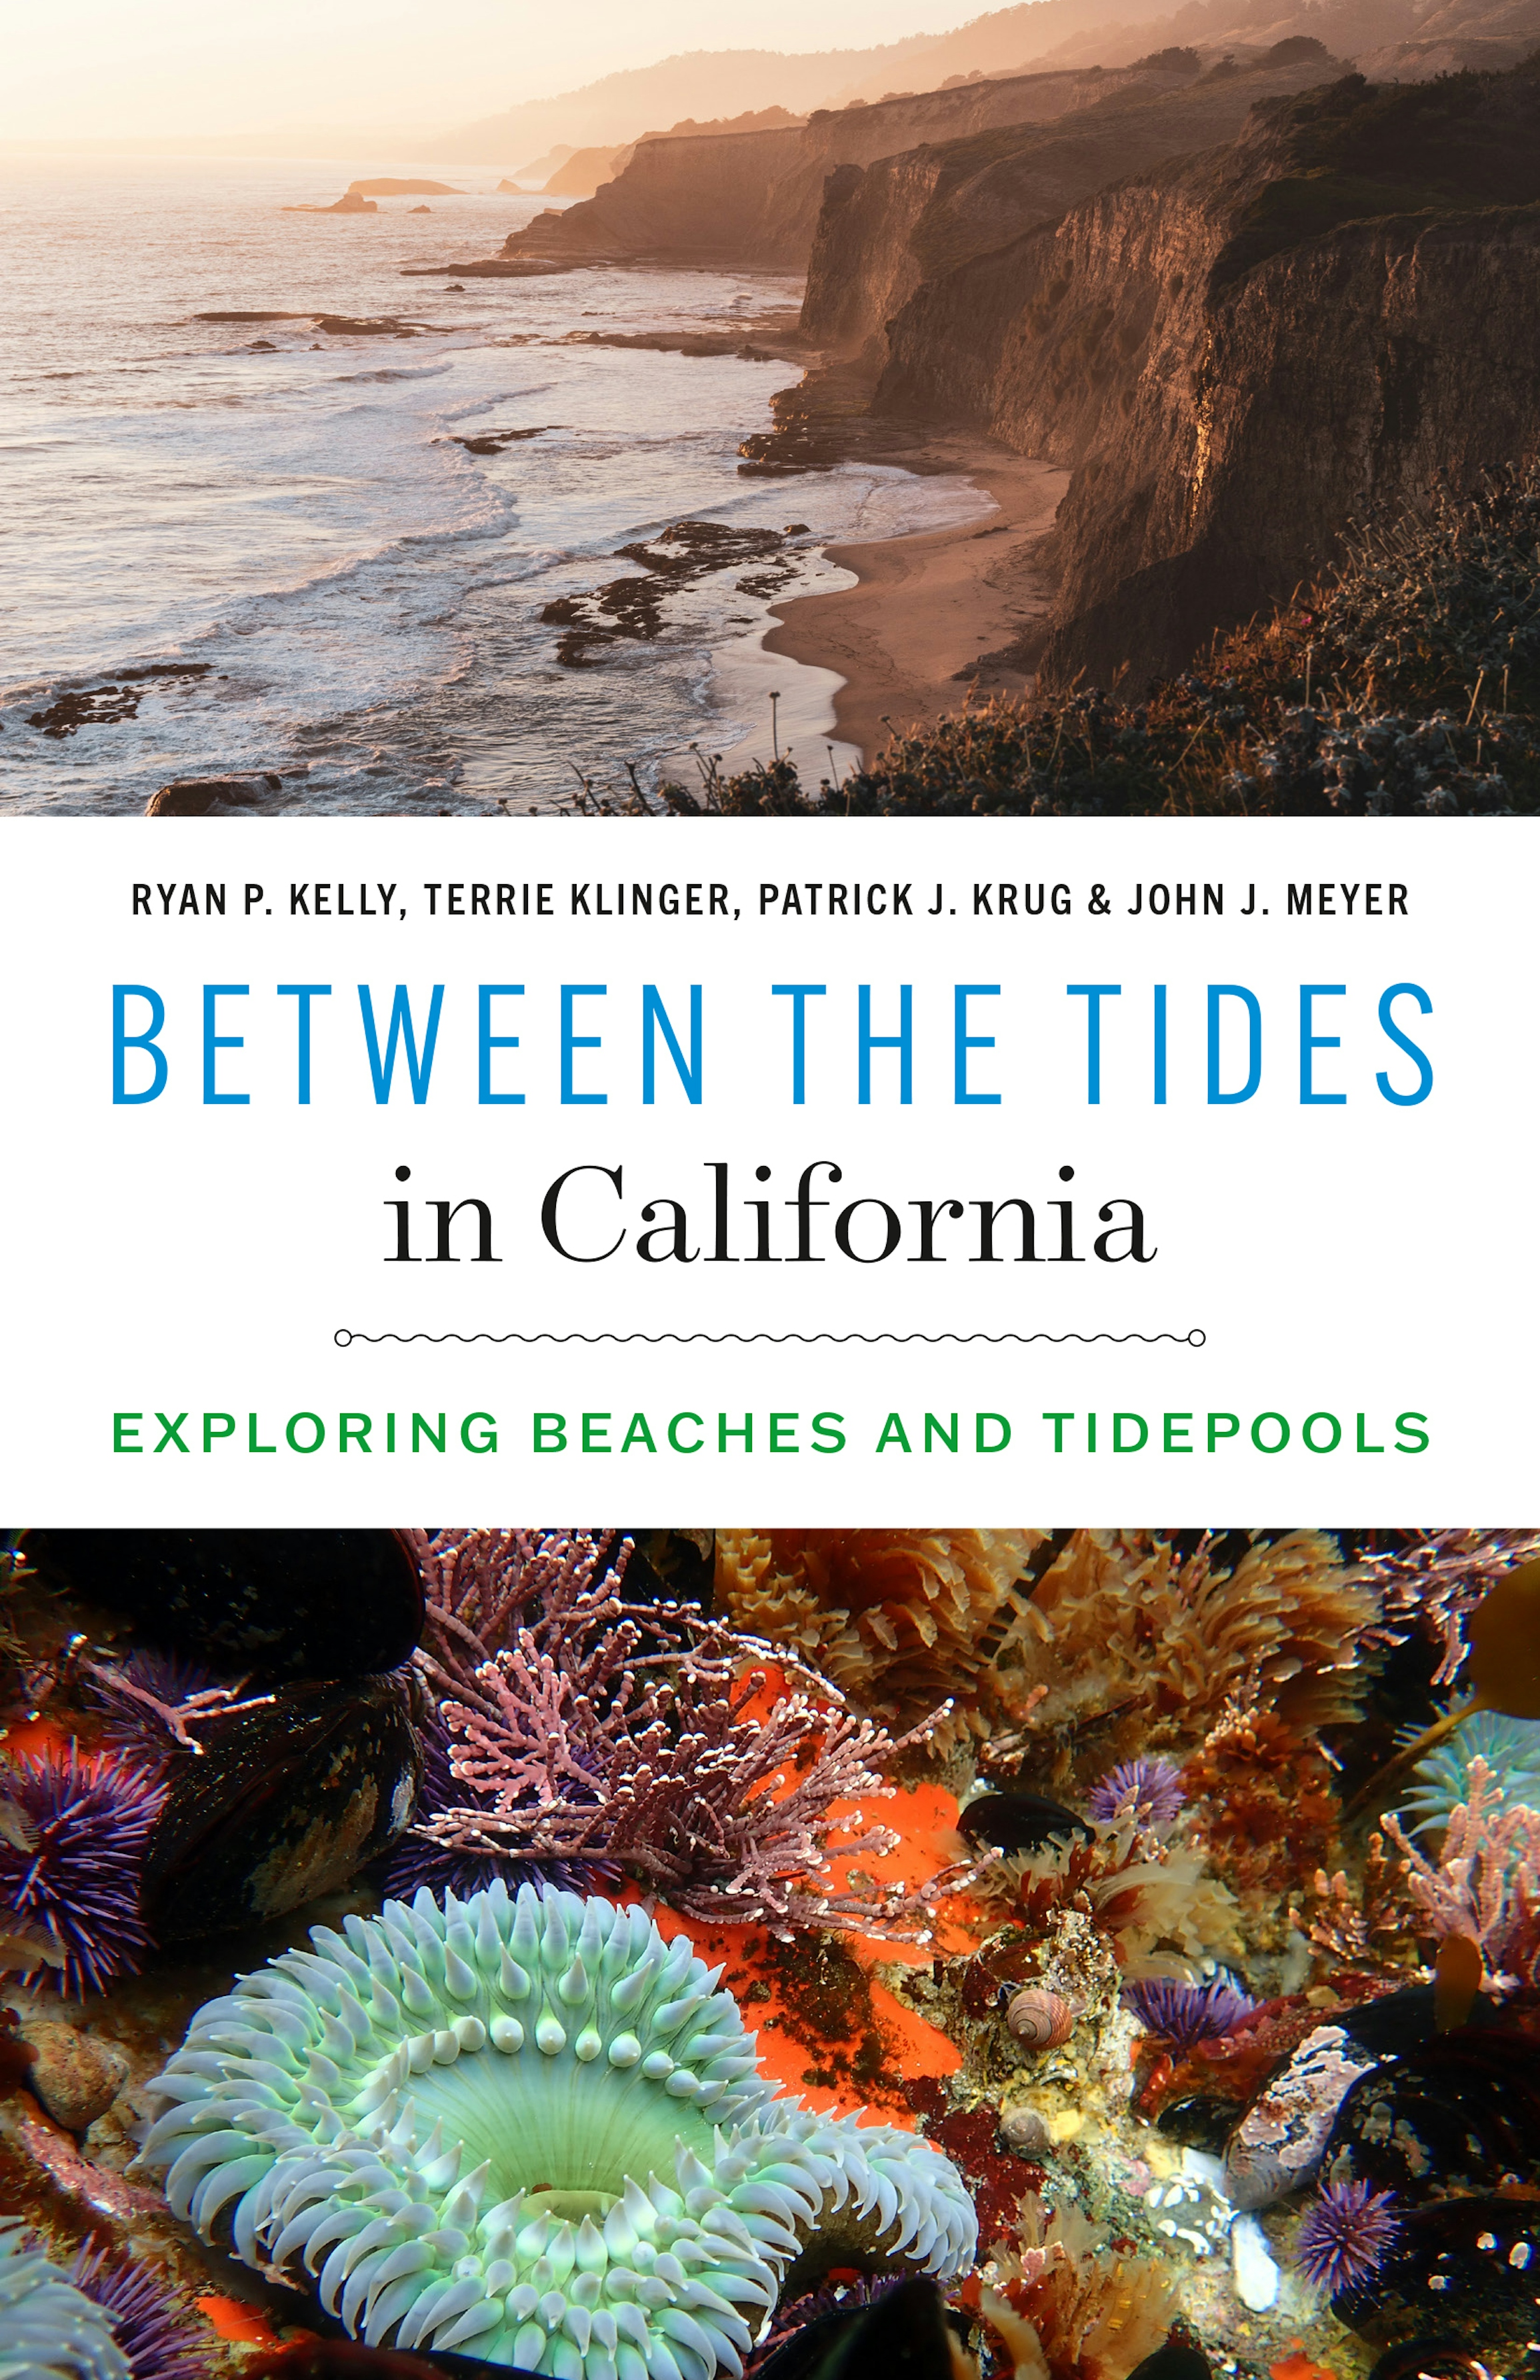 Between the Tides in California